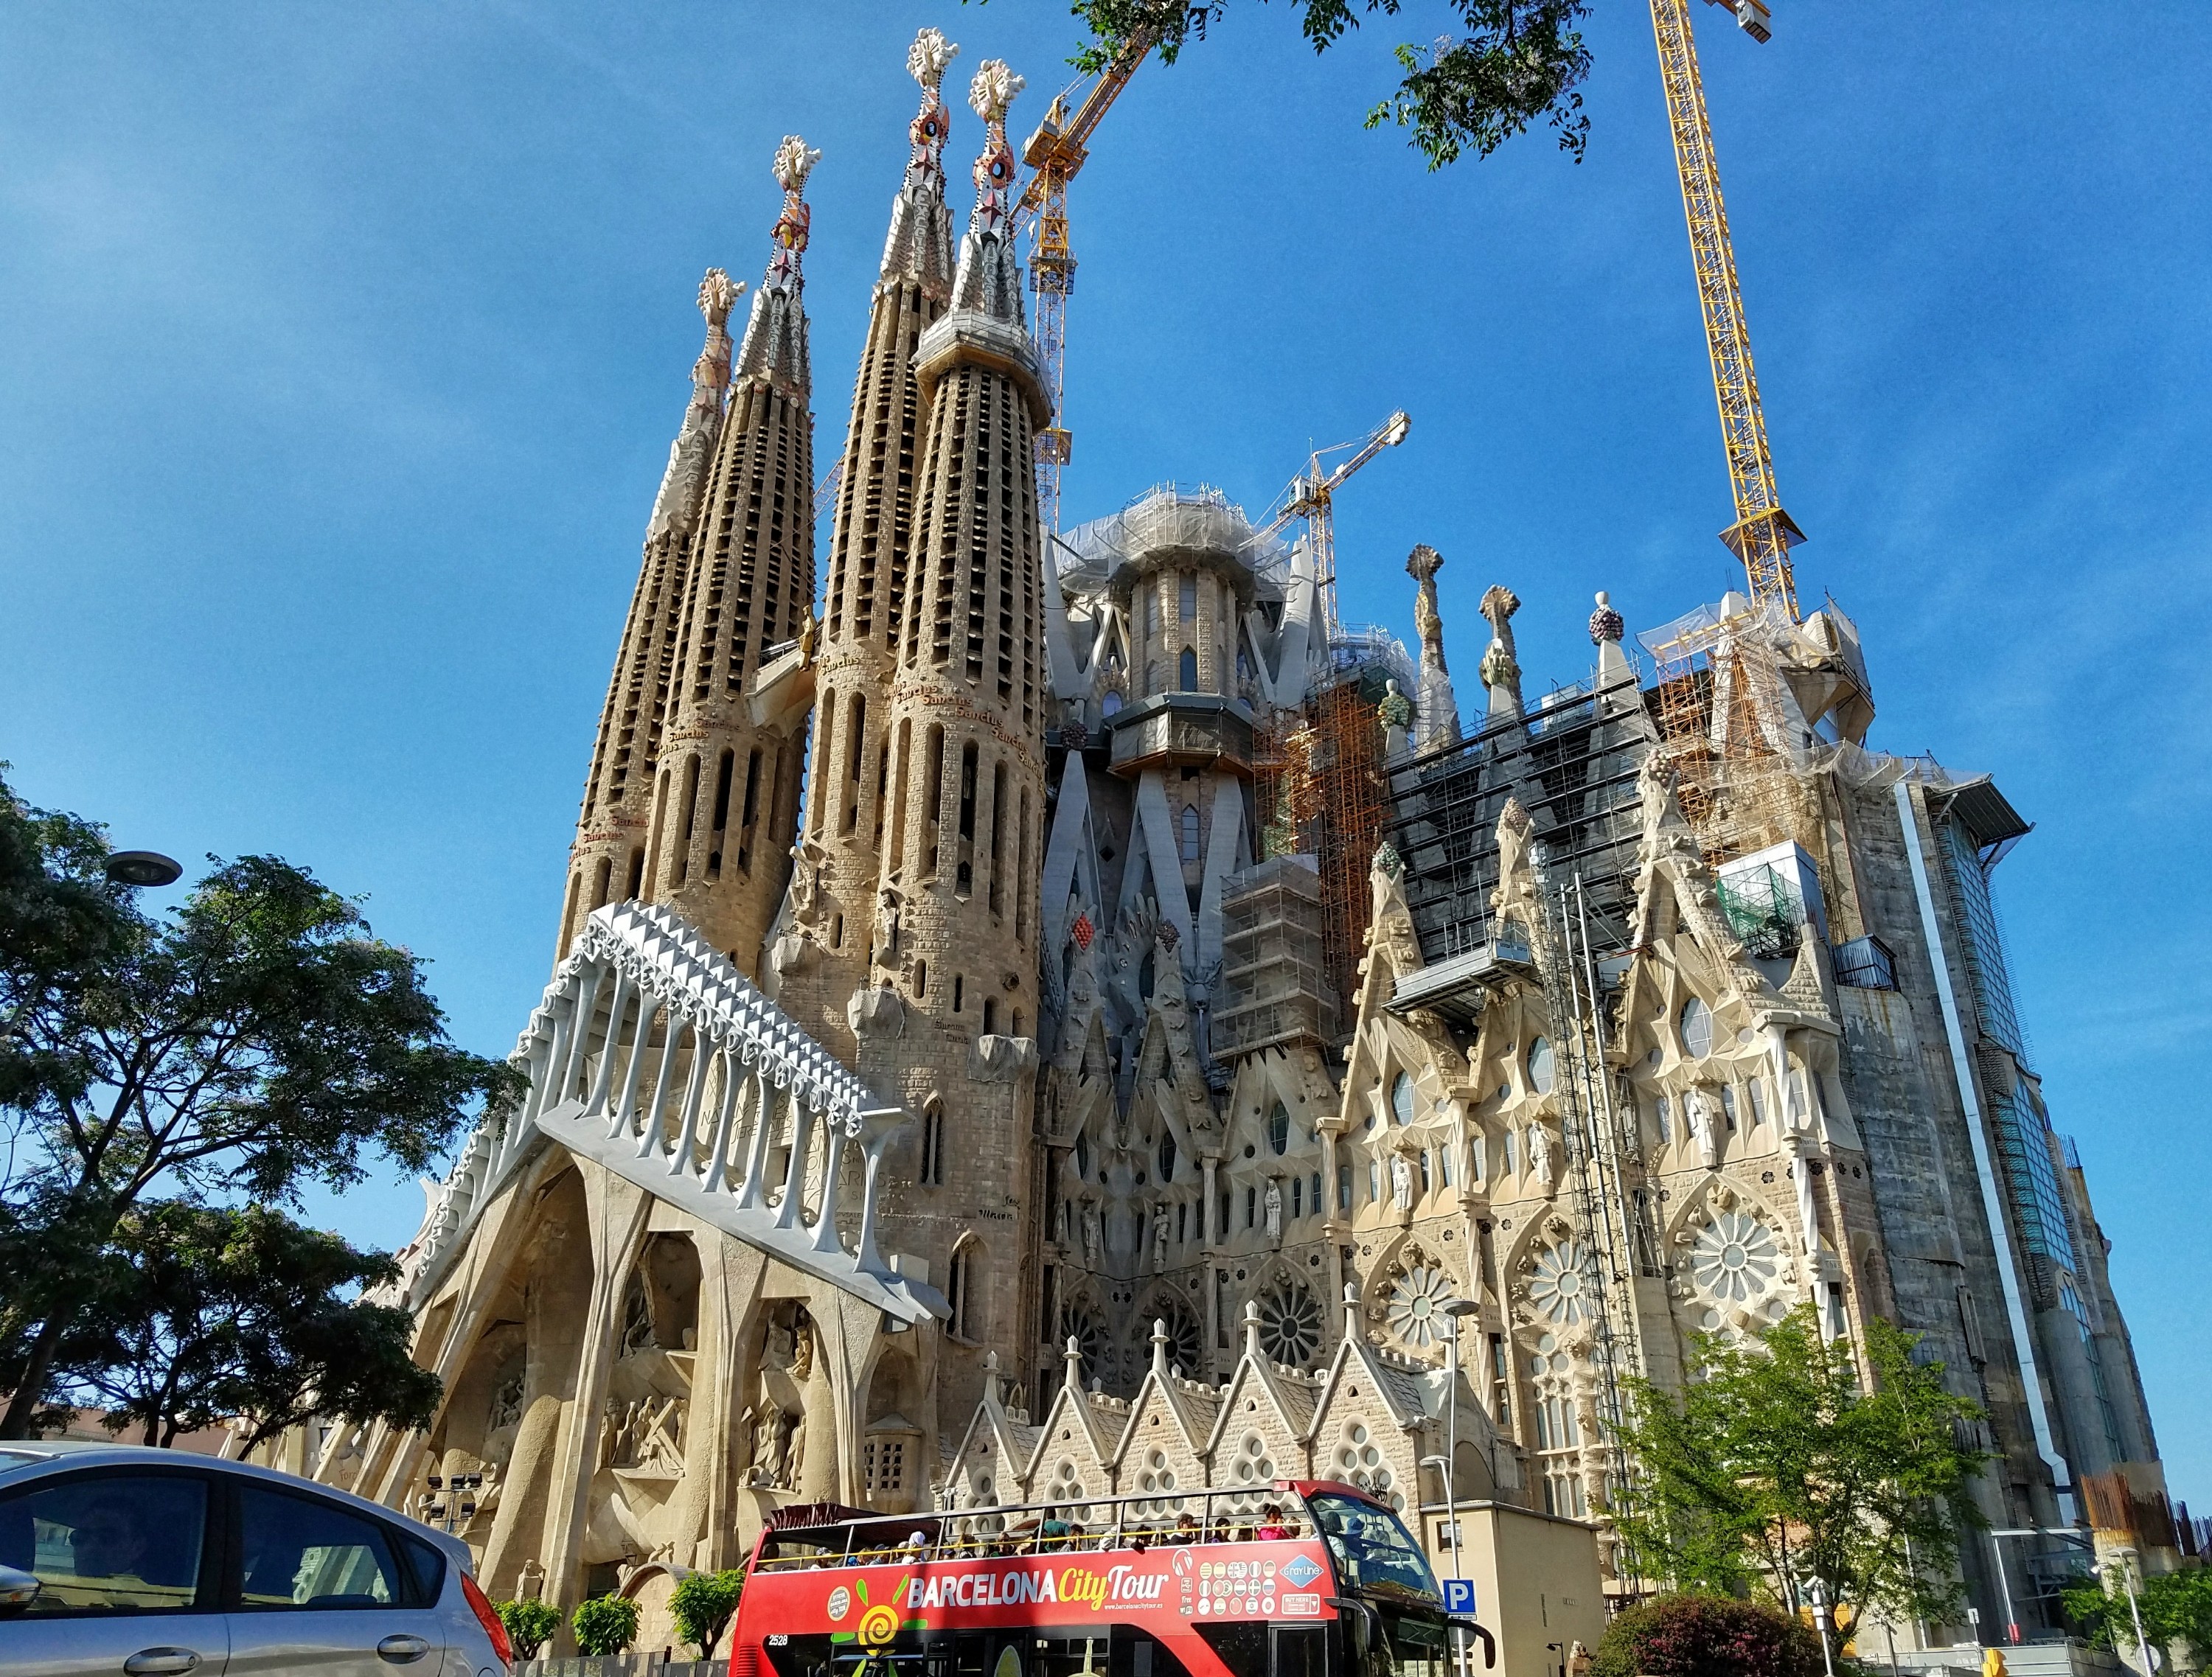 Sagrada Familia in Barcelona Spain with red Barcelona City Tour bus parked in front